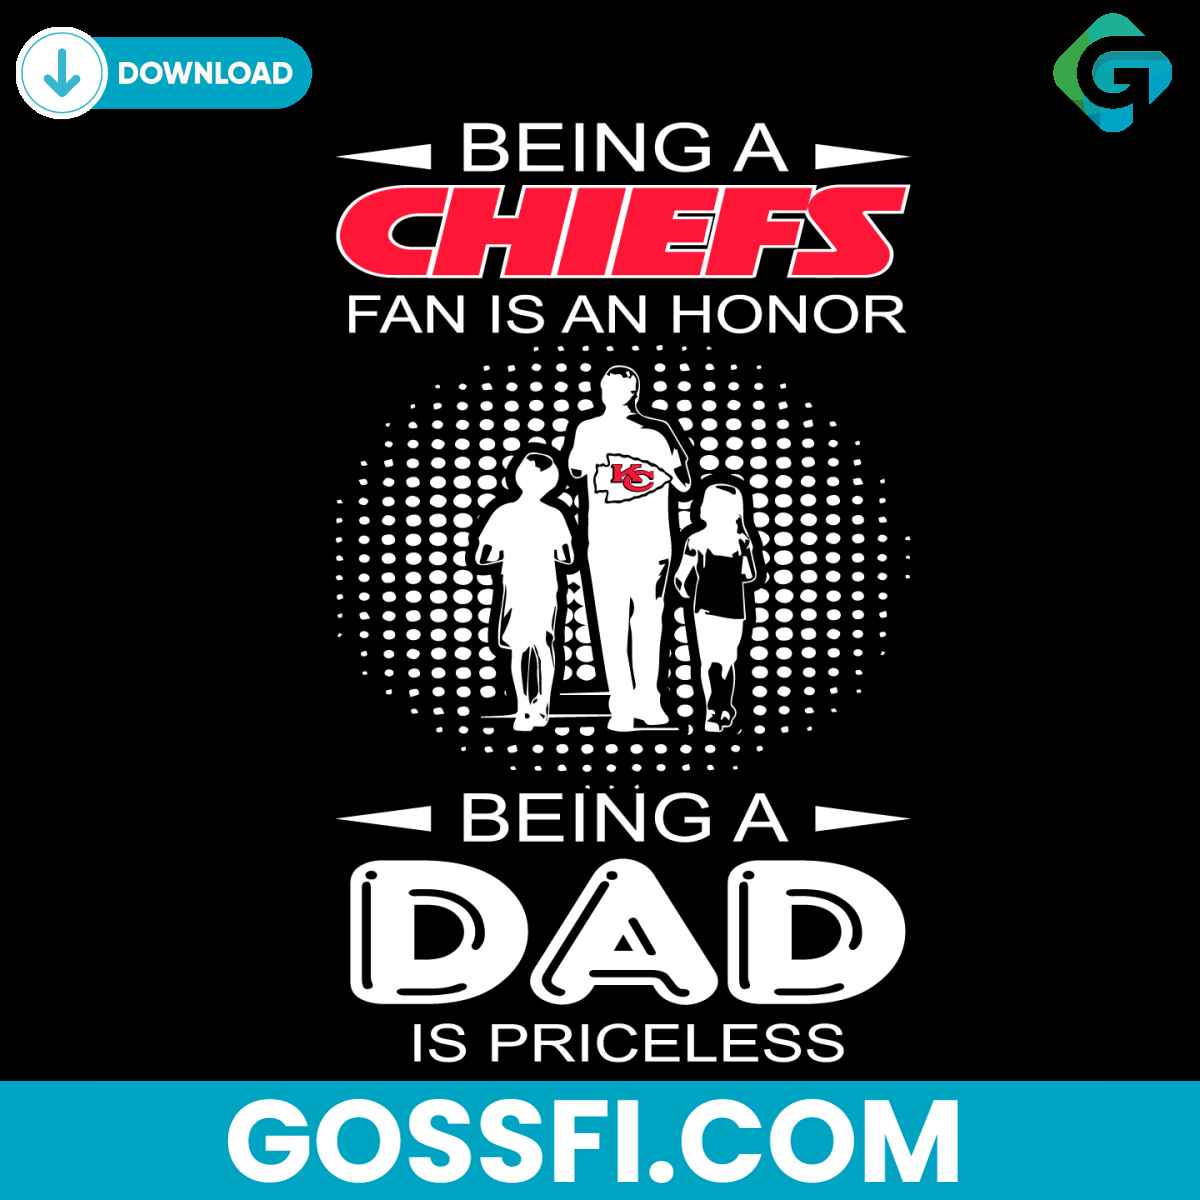 being-a-chiefs-fan-is-an-honor-being-a-dad-is-priceless-svg